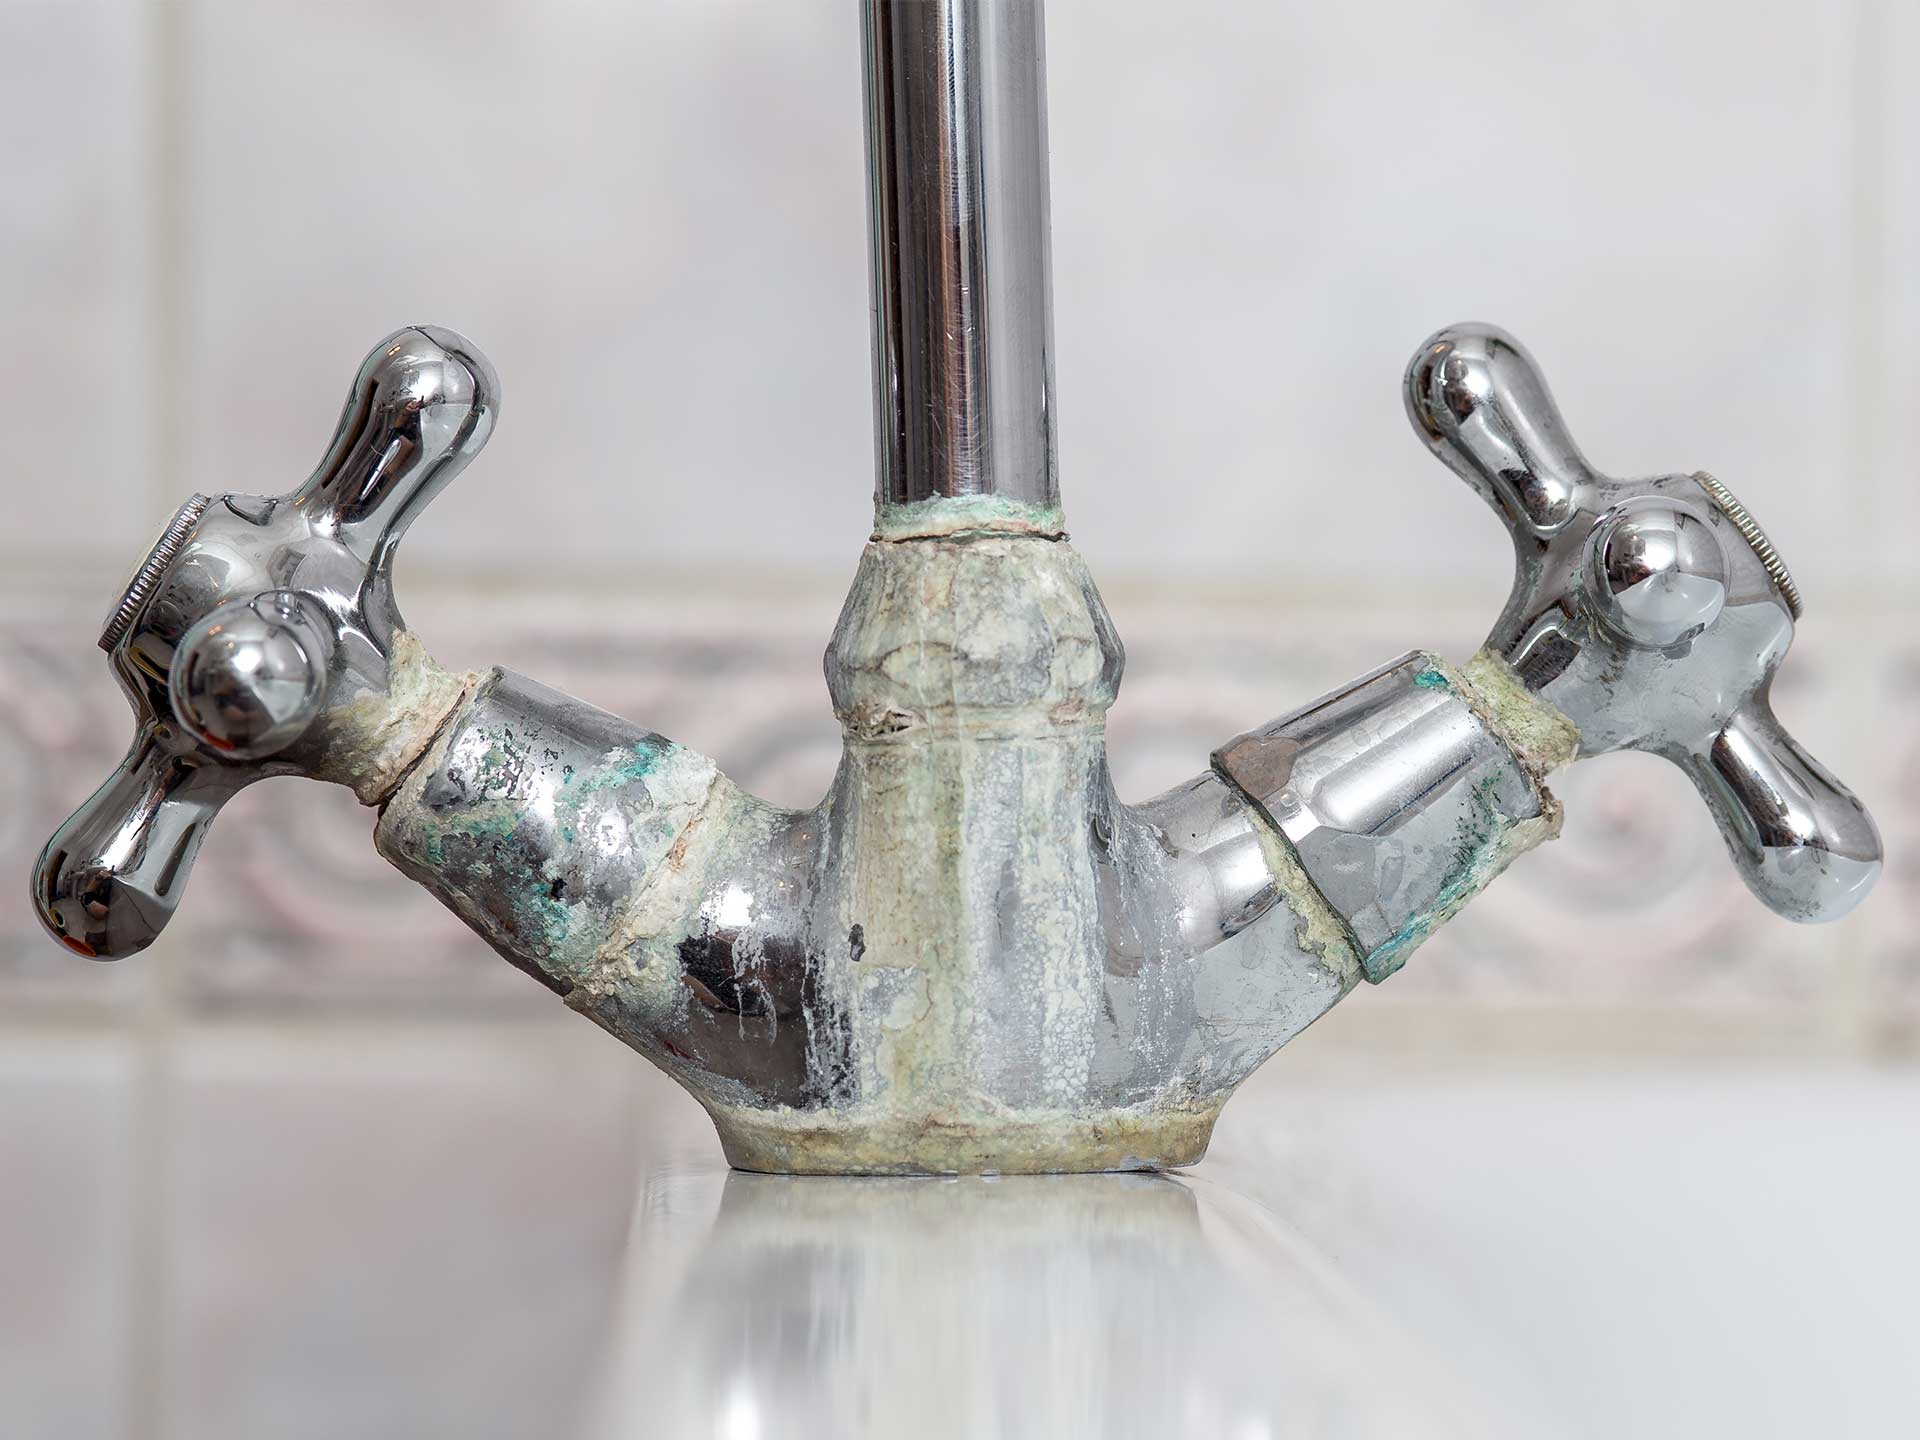 Limescale is a give away sign that you live in a hard water area